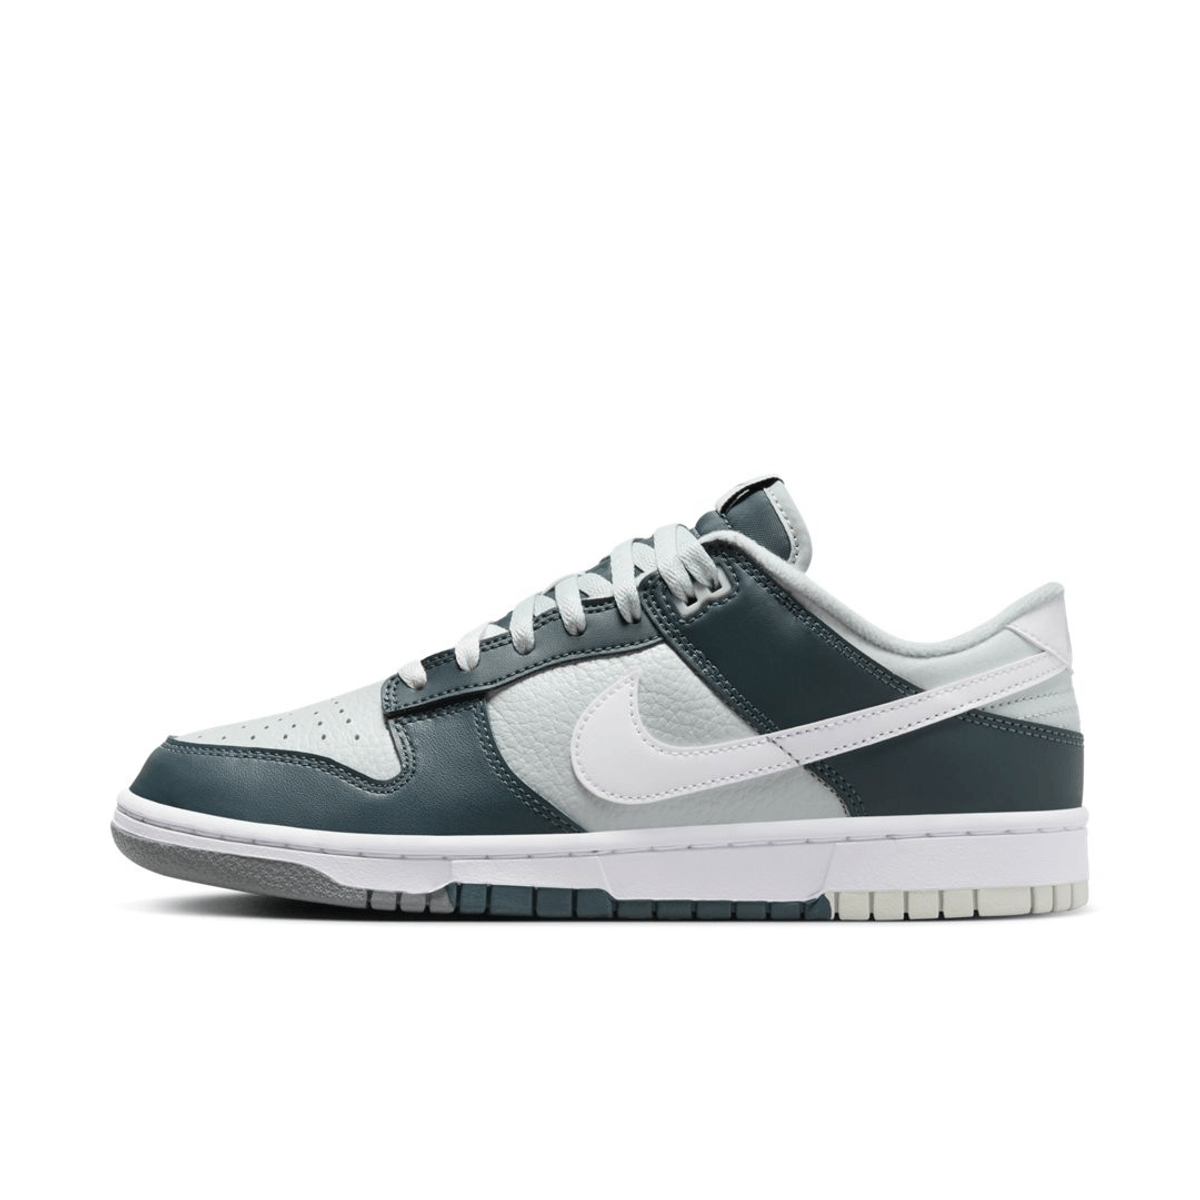 Official Images Of The Nike Dunk Low 